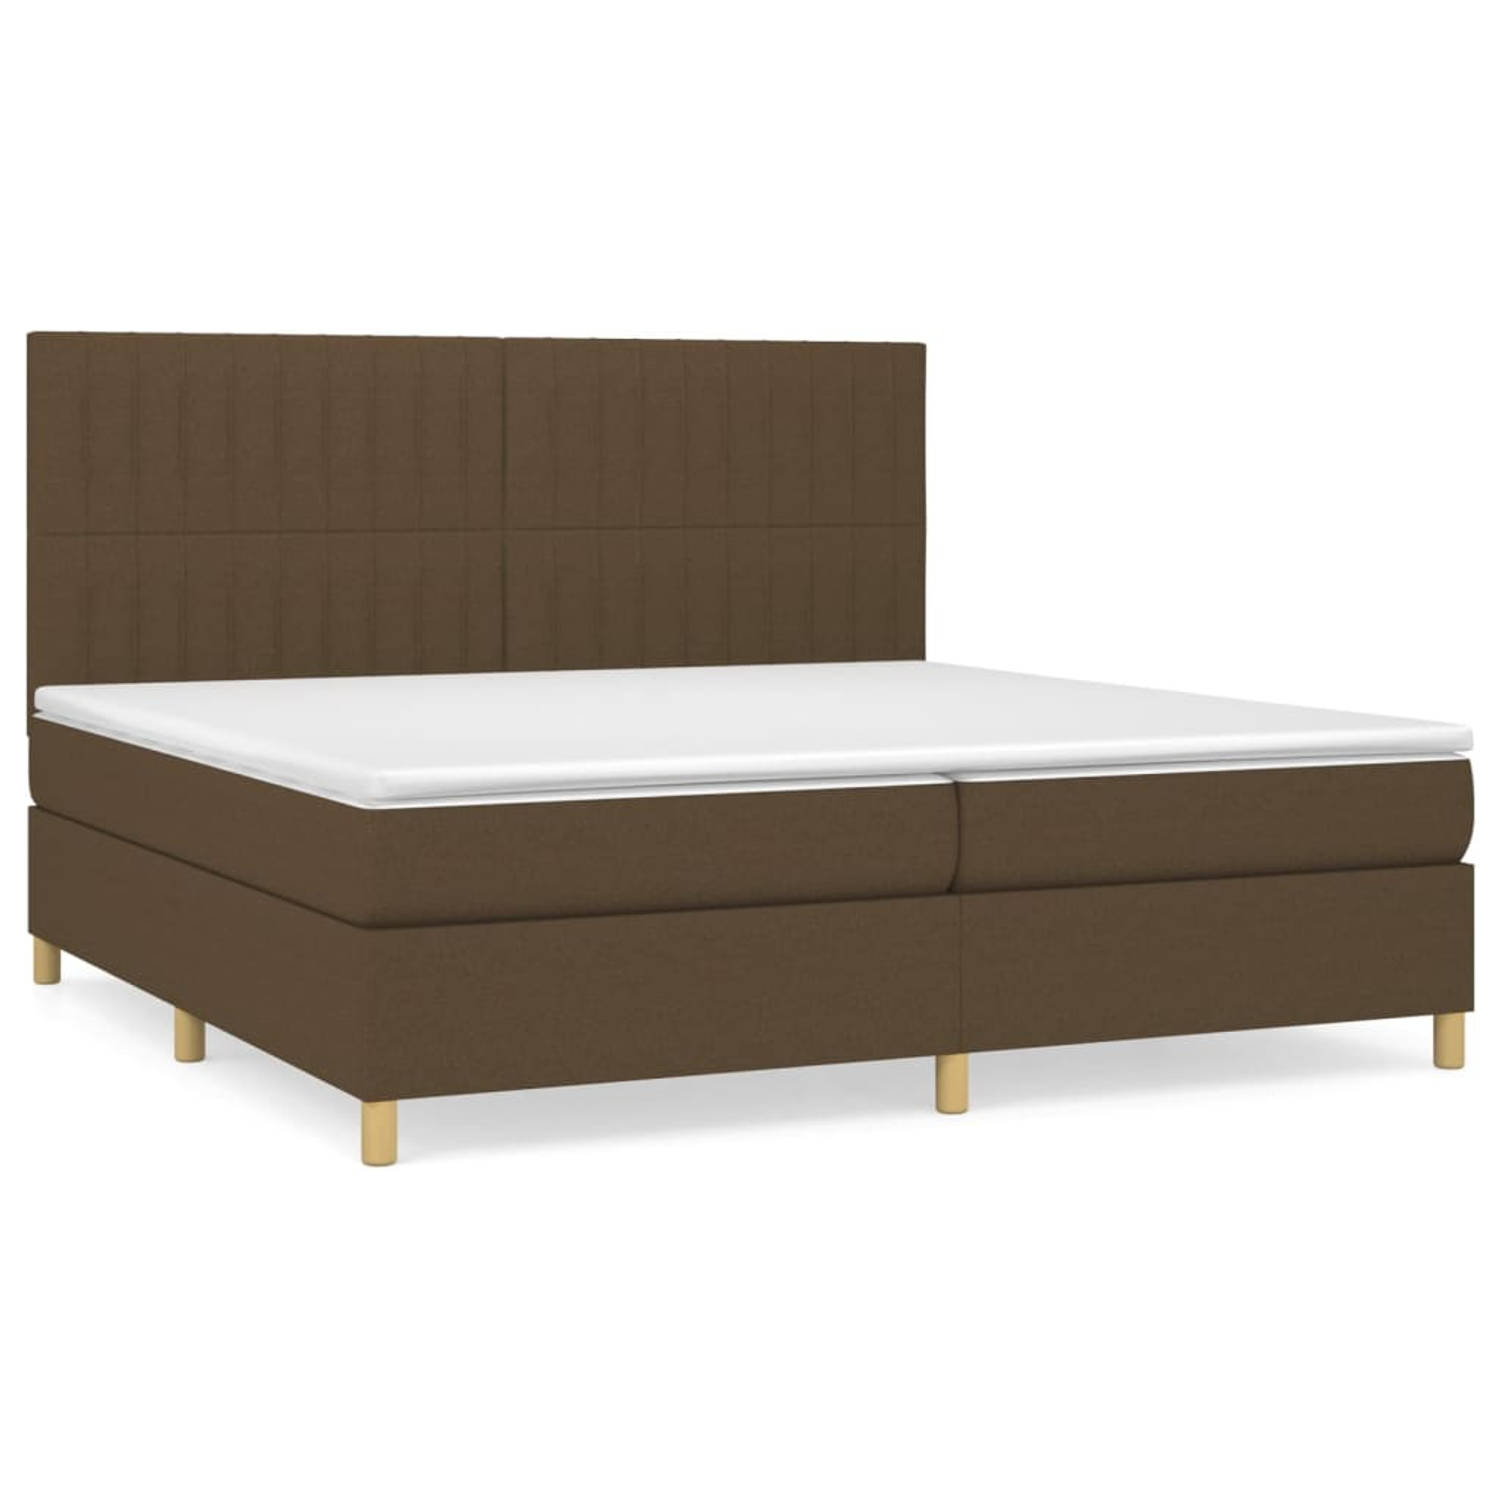 The Living Store Boxspringbed - Donkerbruin - 203 x 200 x 118/128 cm - Pocketvering